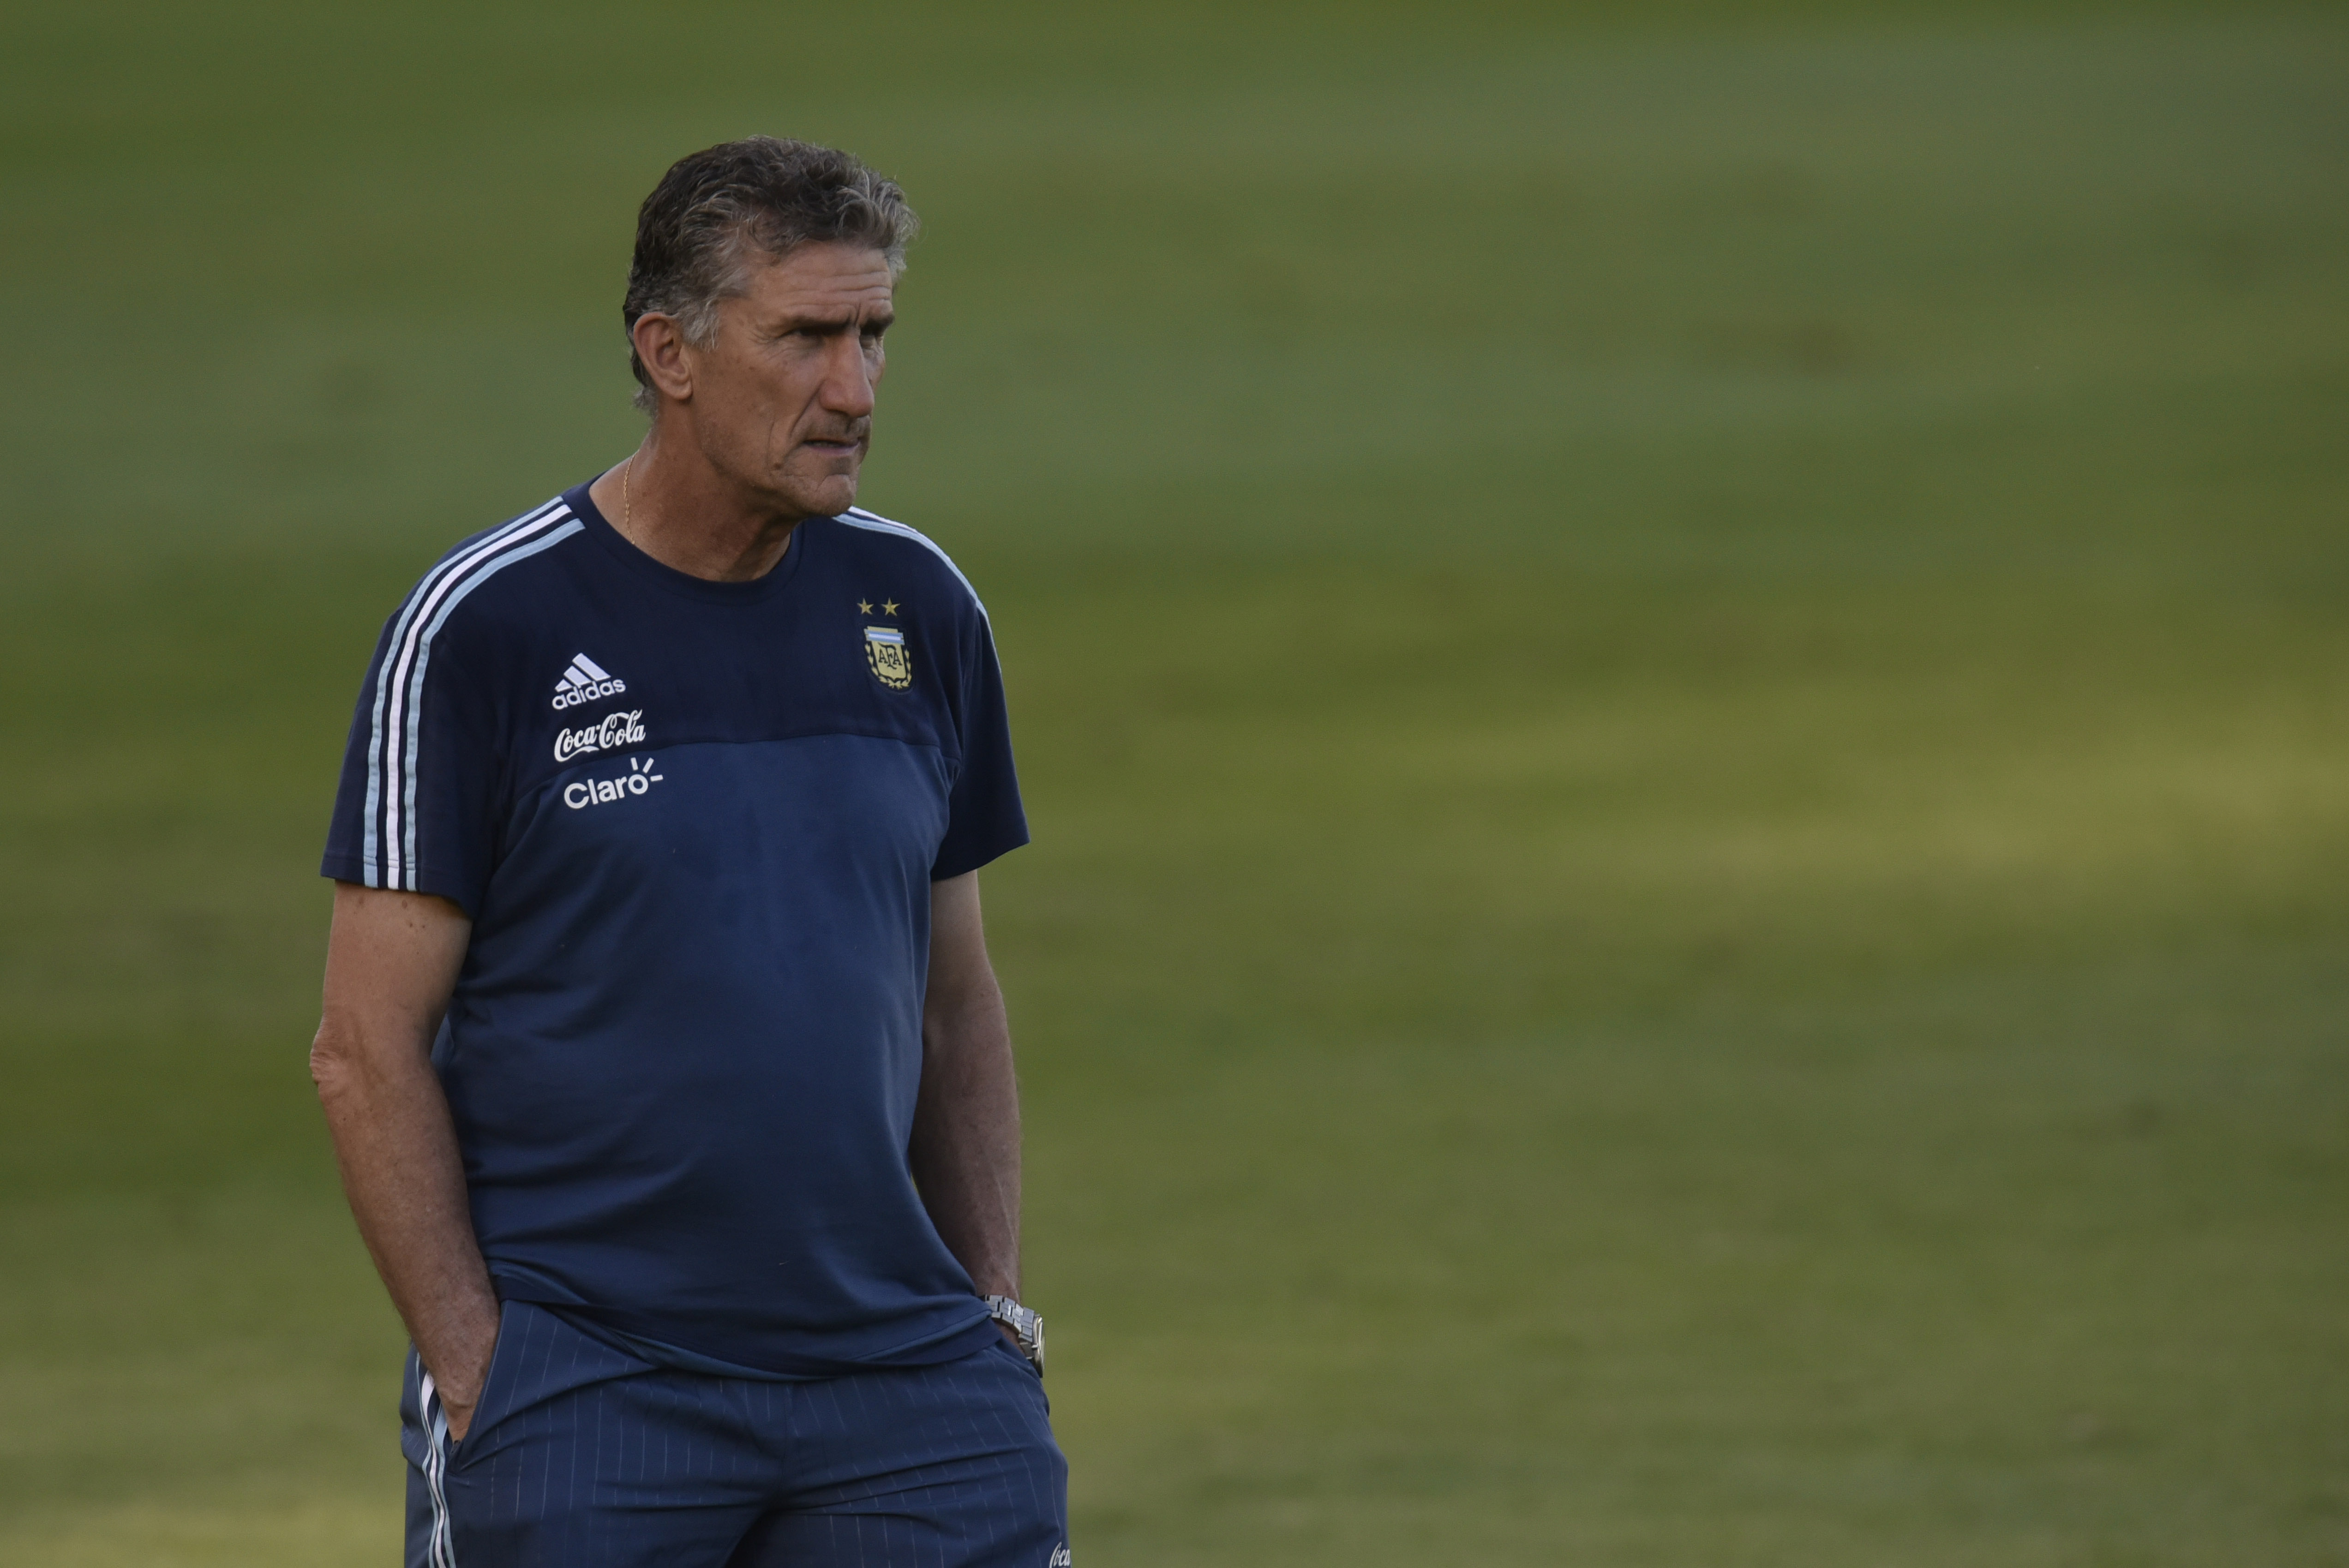 Bauza: “Icardi? Neither Messi nor Mascherano affected my choices”